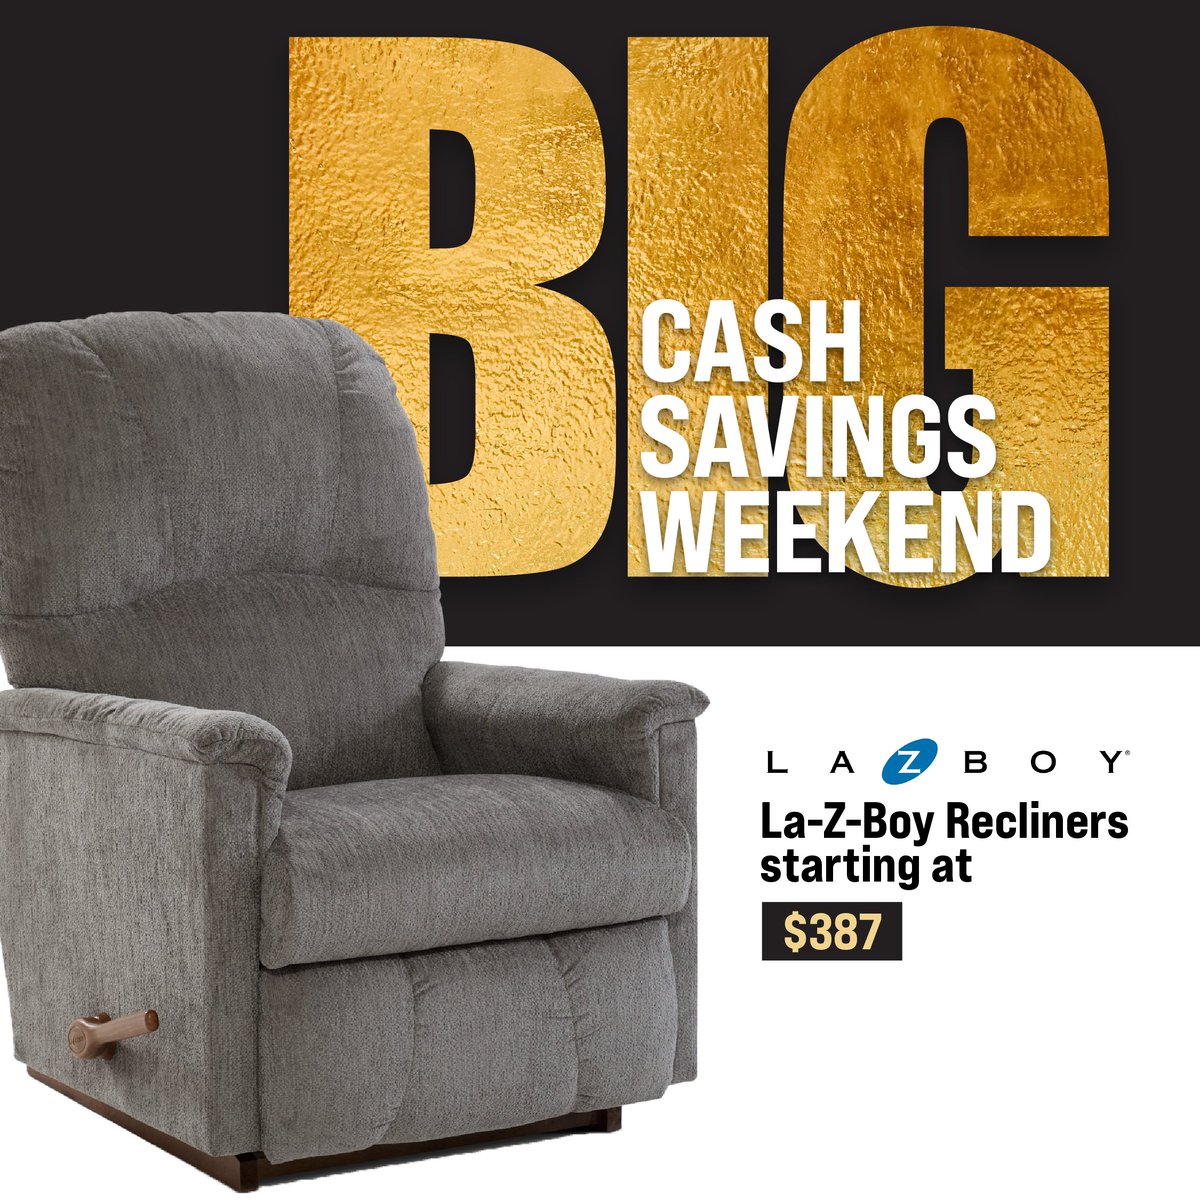 Have you ever sat in a more comfortable recliner than a La-Z-Boy? 

Today is the last day for our Big Cash Savings Weekend, where La-Z-Boy recliners start at $387.

May 3-5.

#klosstohome #localbusiness #furnituredeals #lazboy